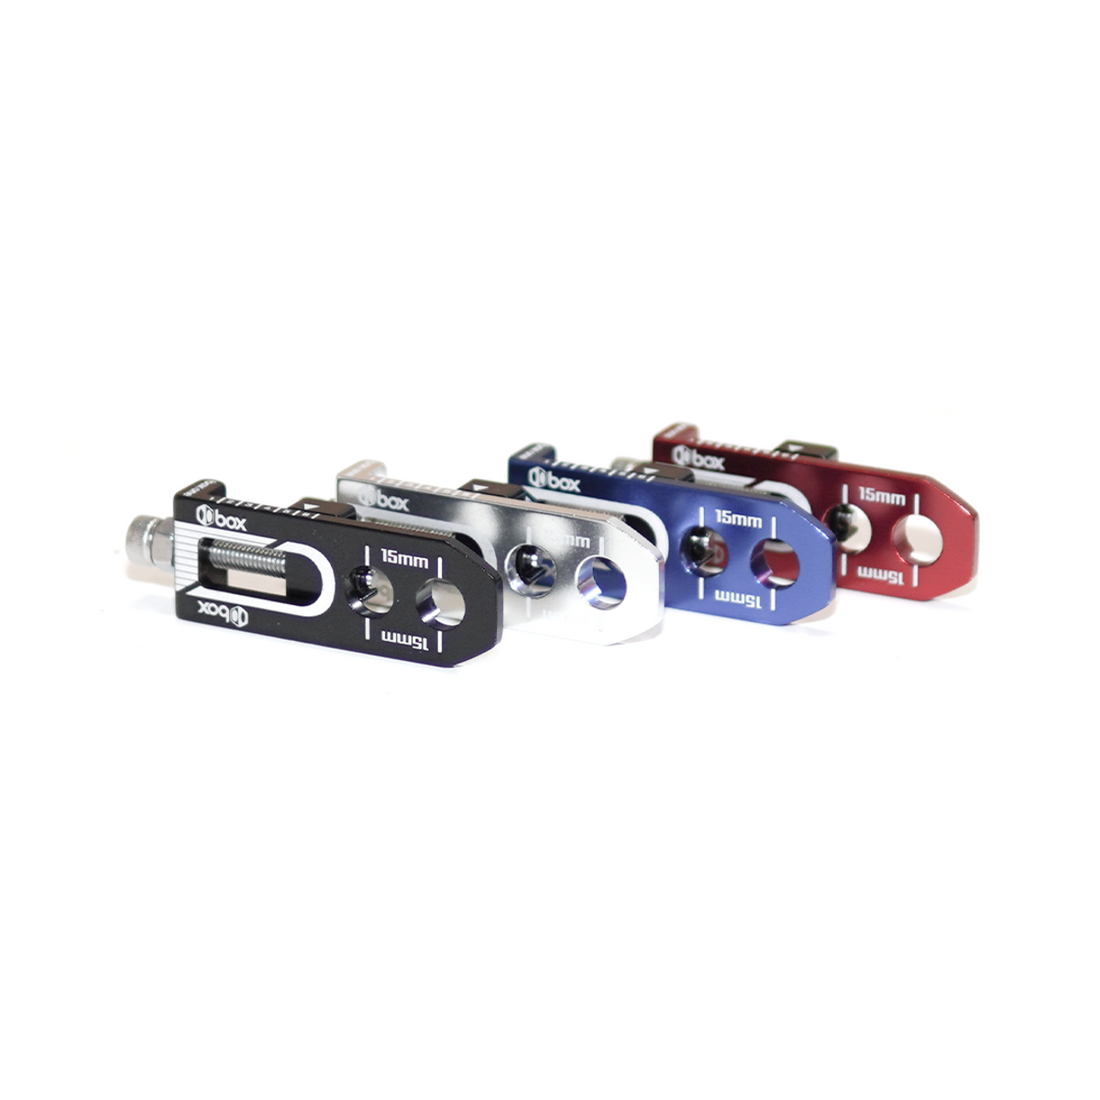 Box One Chain Tensioner 10mm x 2 Axle Hole - boxcomponents